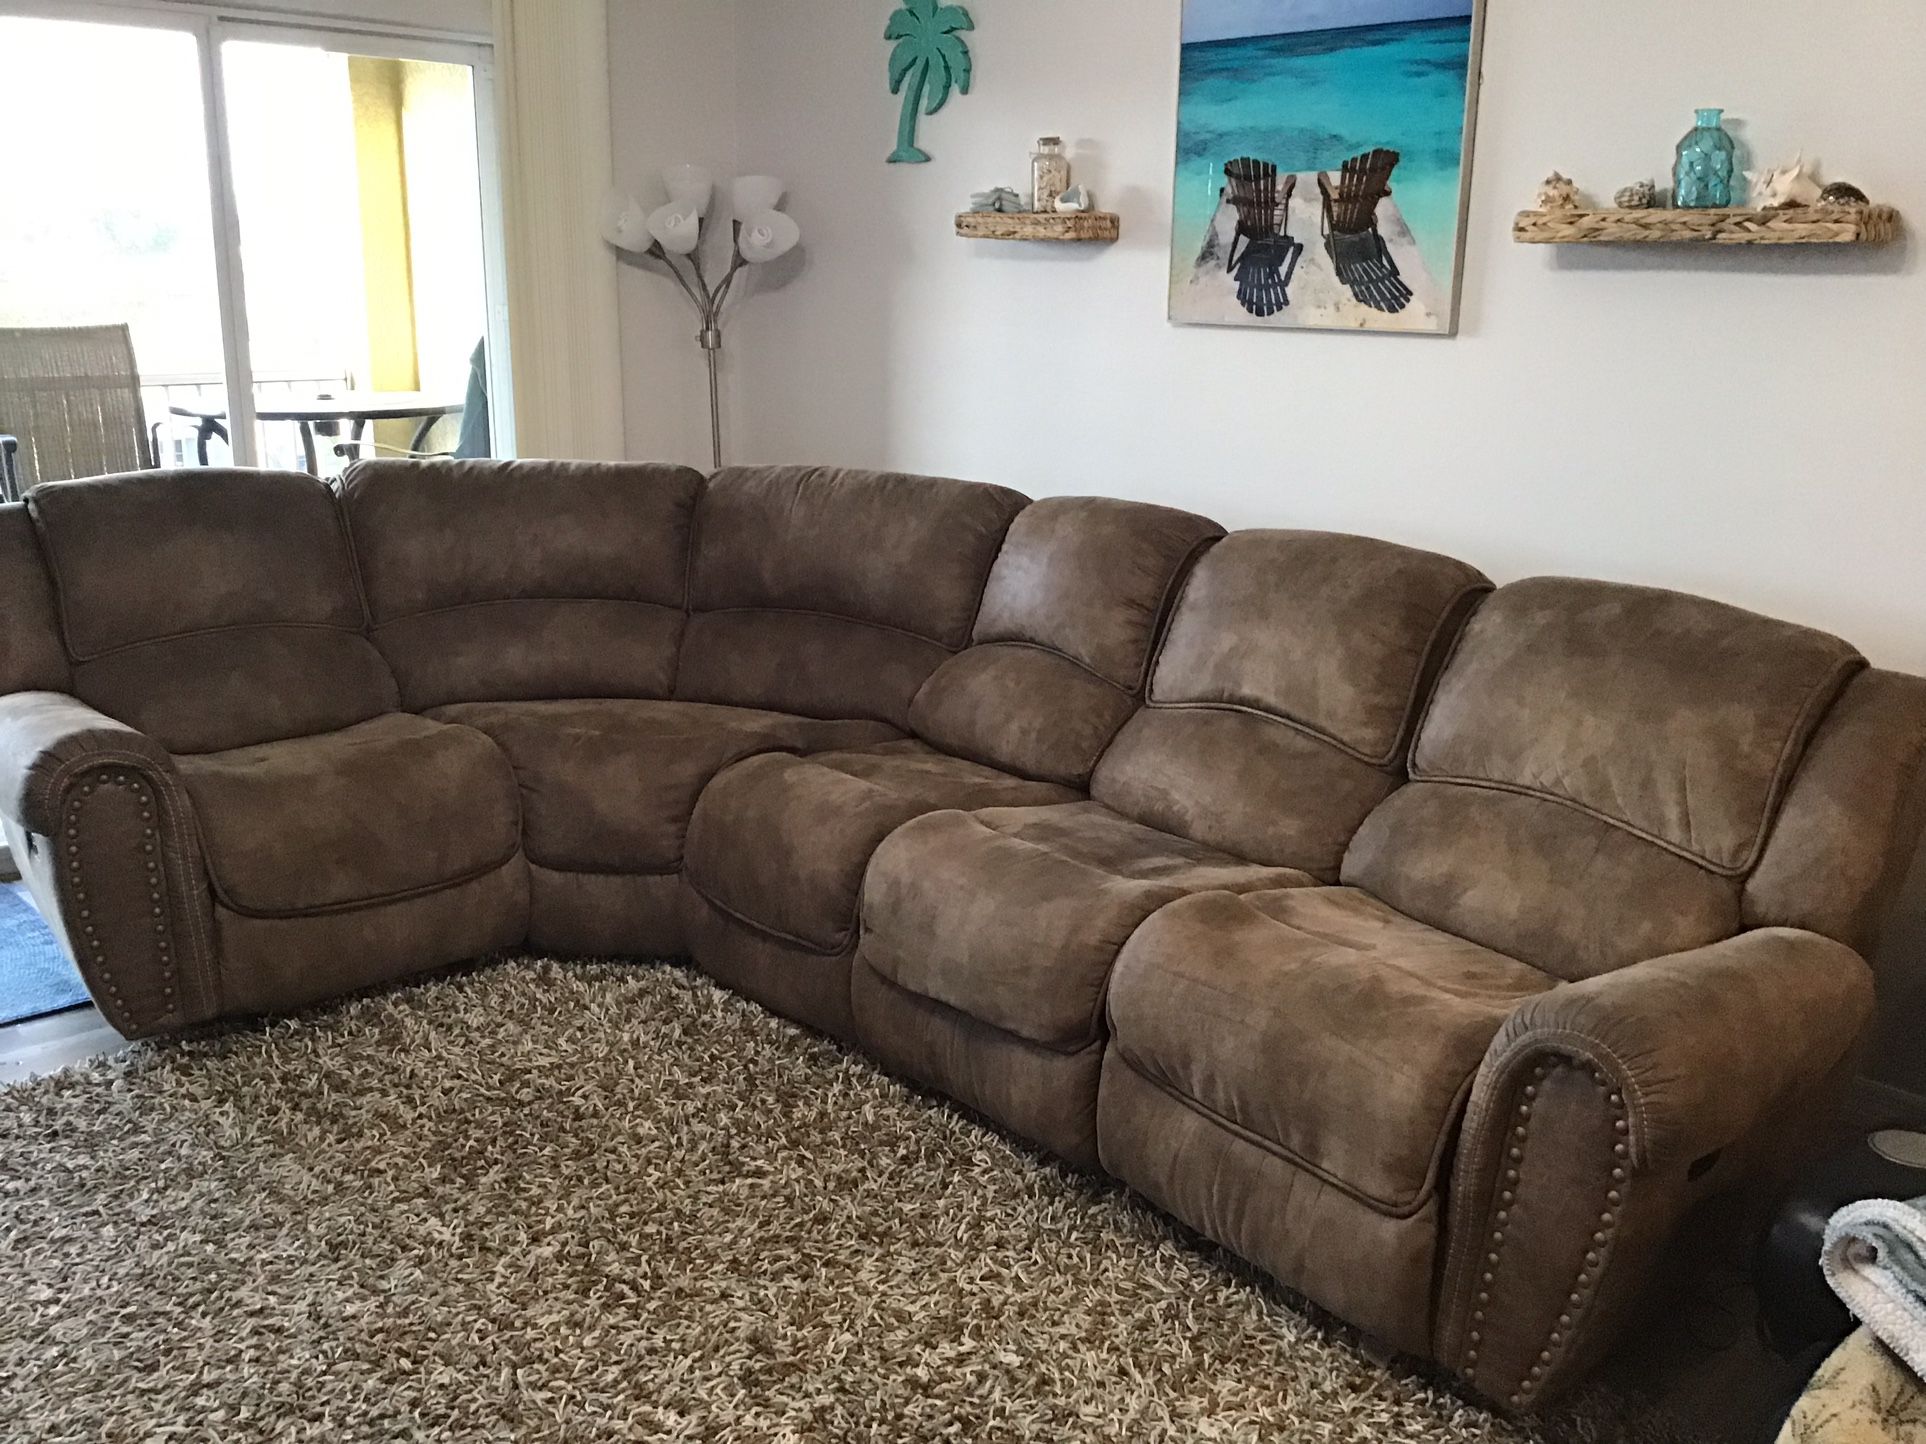 5 piece Sectional Microfiber Brown Couch~3 Reclining seats~NO RIPS, TEARS, STAINS OR DISCOLORATION 